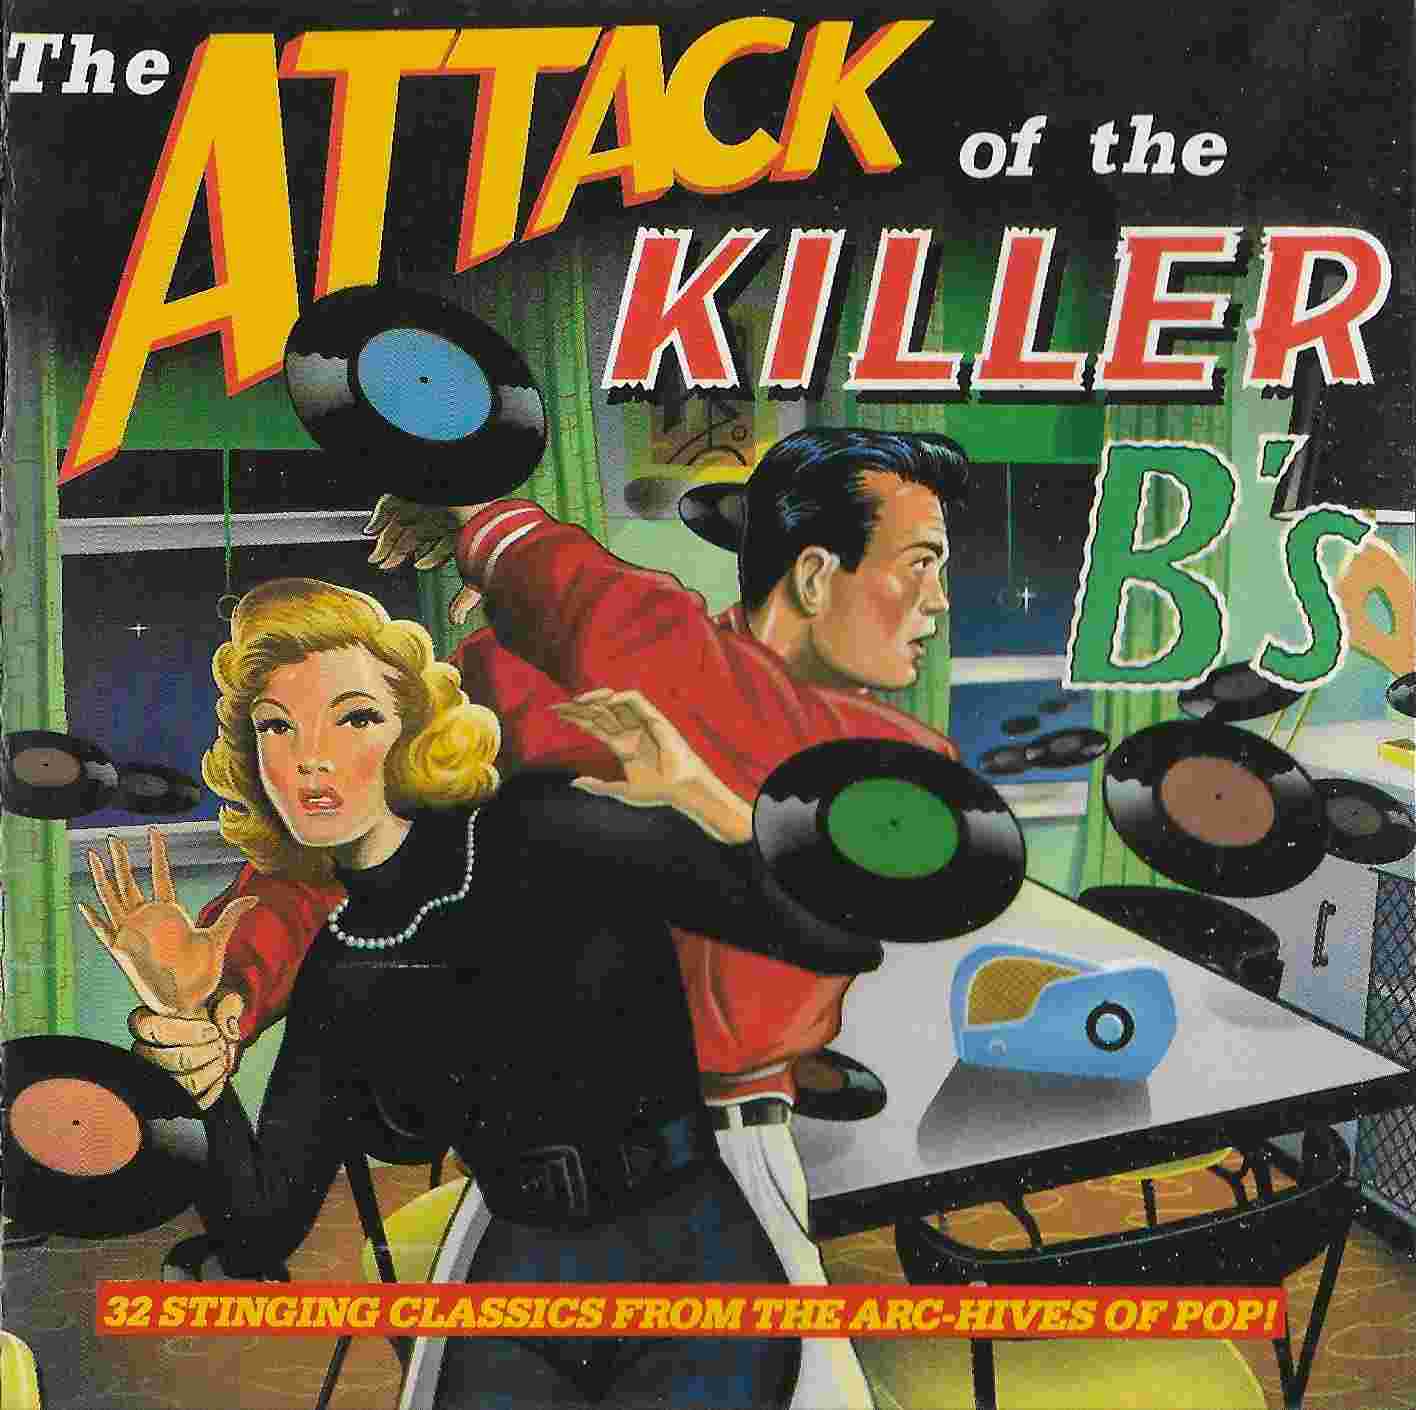 Picture of The attack of the killer b's by artist Various from the BBC cds - Records and Tapes library